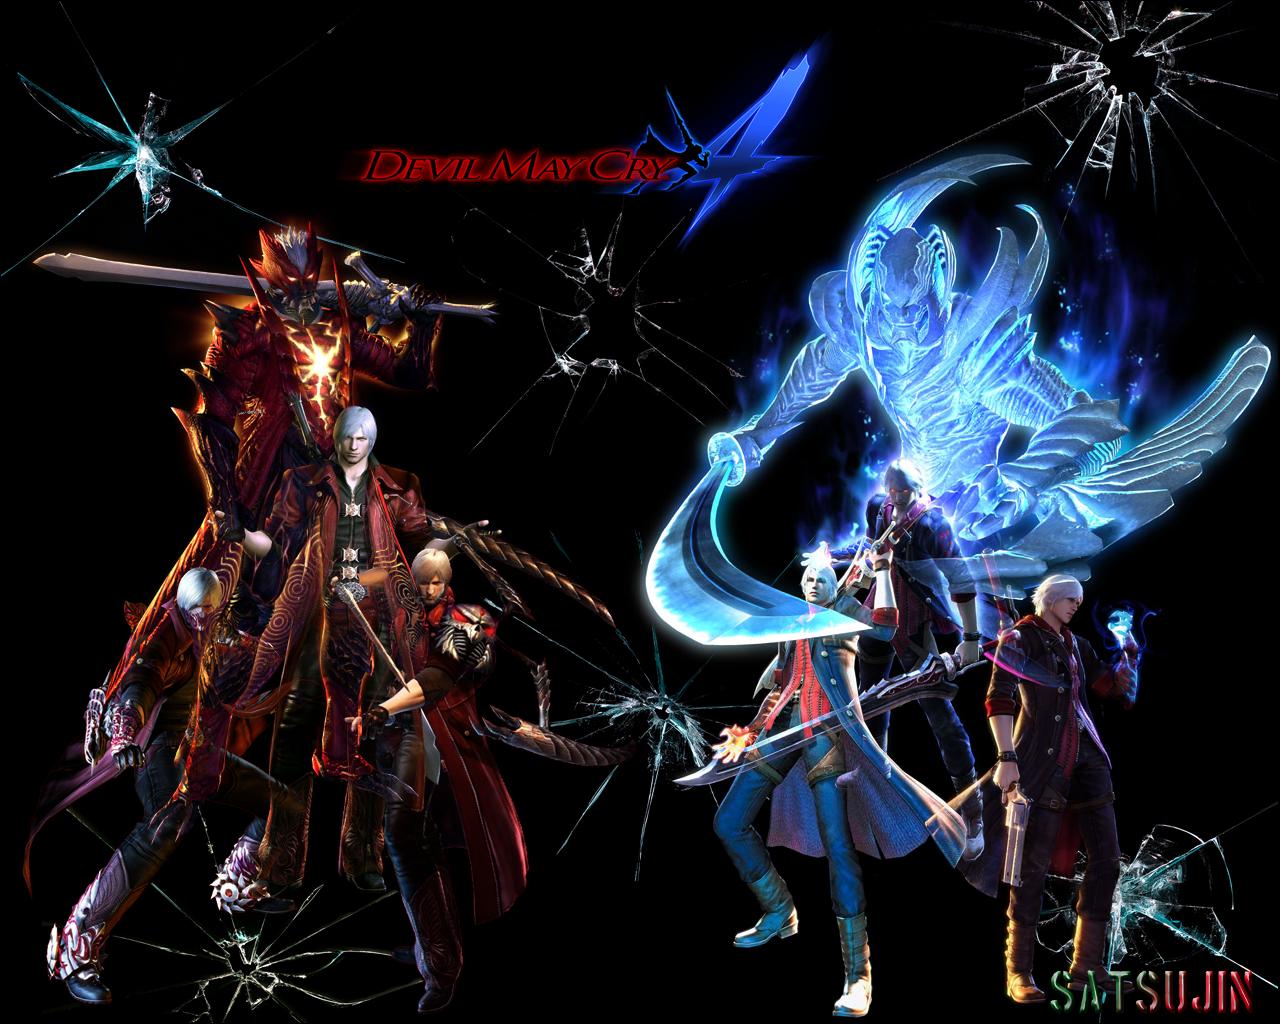 Wallpapers Devil May Cry Devil May Cry 4 Games Image #139020 Download